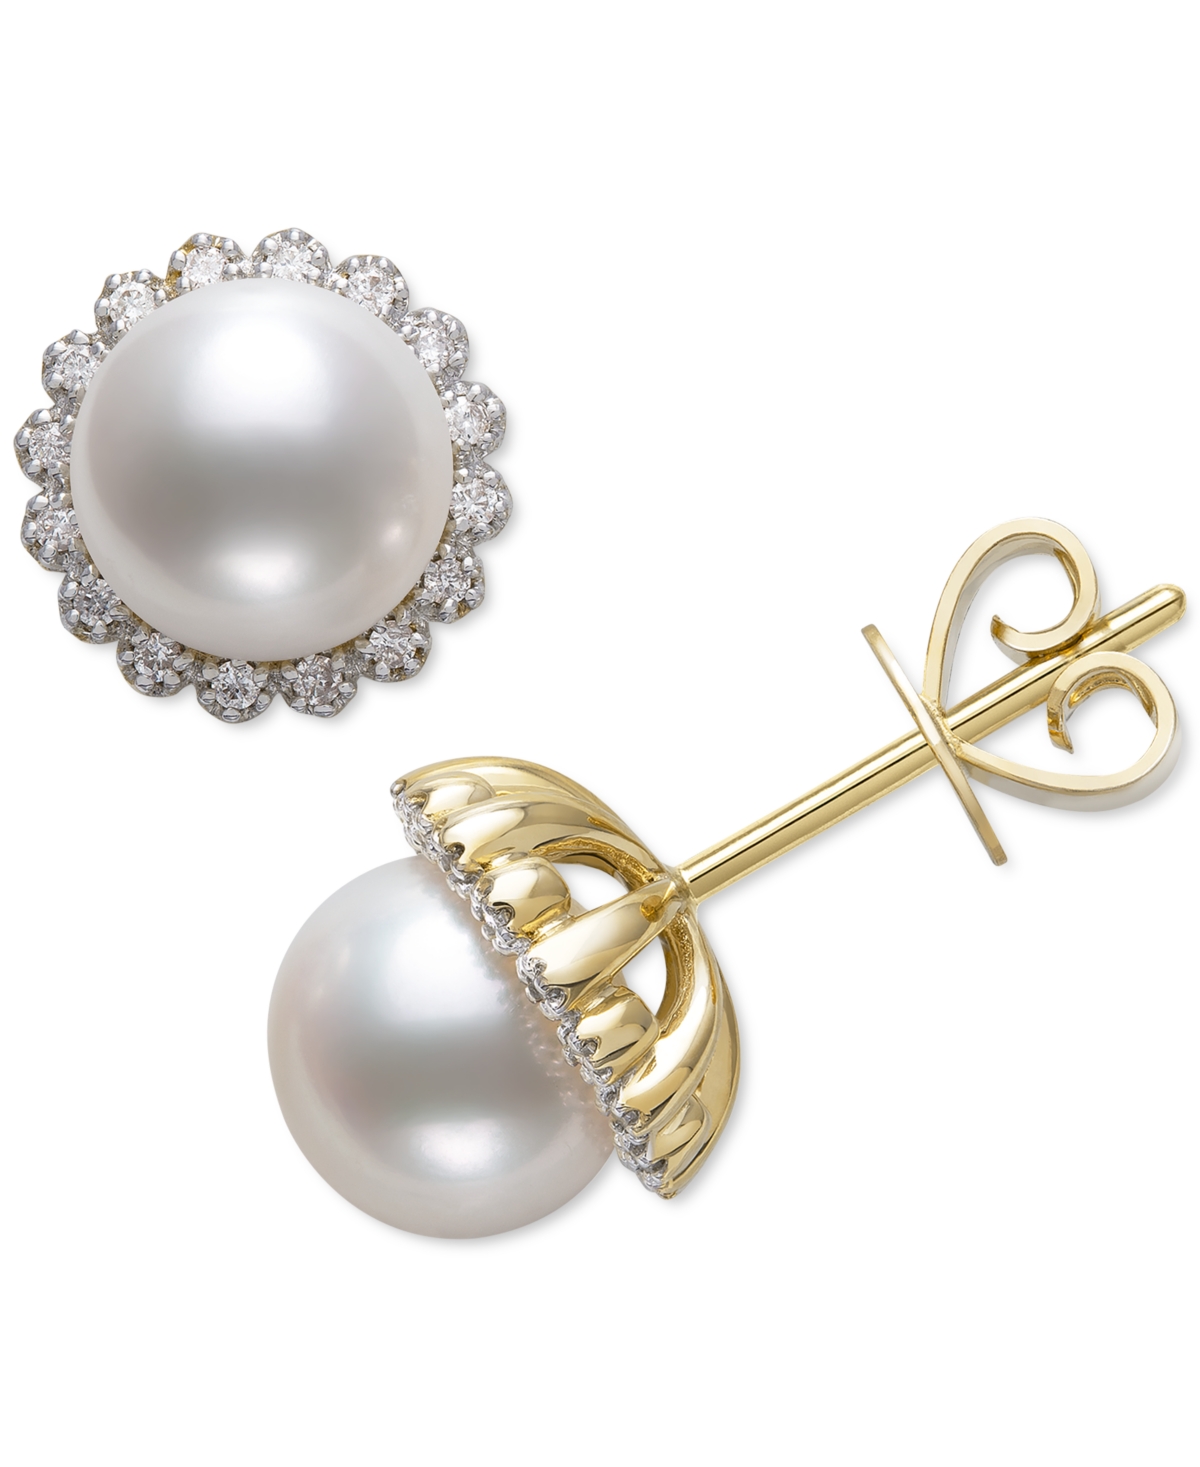 Cultured Freshwater Pearl (7mm) & Diamond (1/8 ct. t.w.) Halo Stud Earrings in 14k Gold, Created for Macy's - Gold